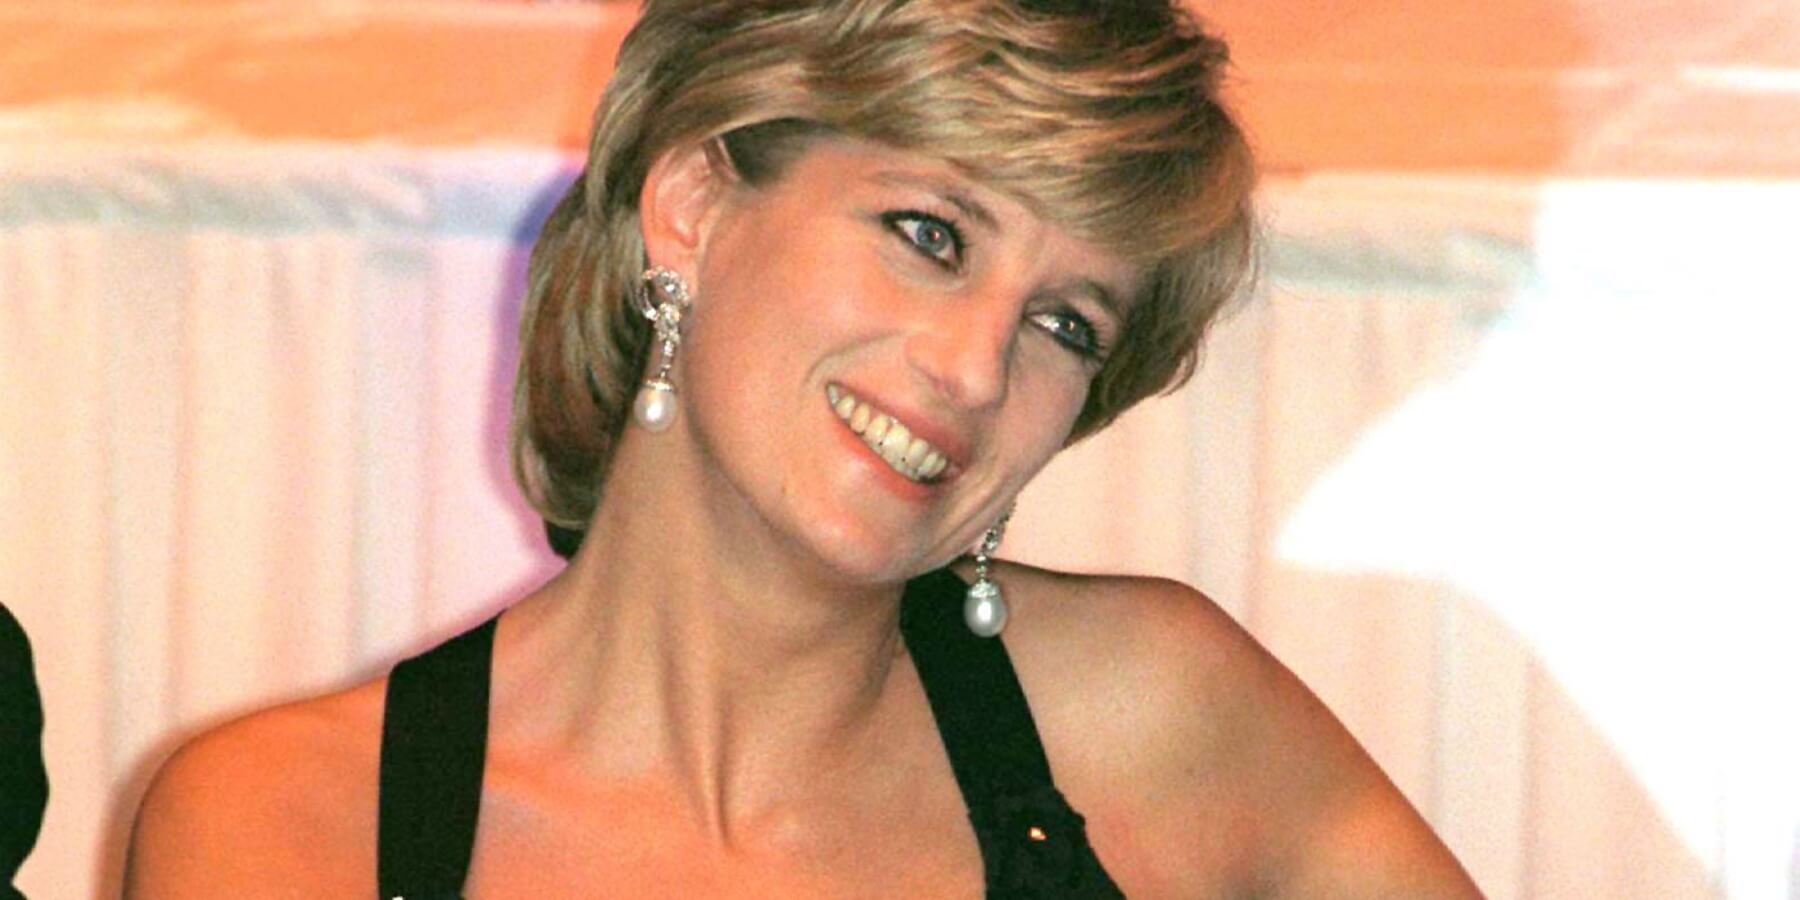 Princess Diana's royal chef said she prioritized her health and diet in her later years.